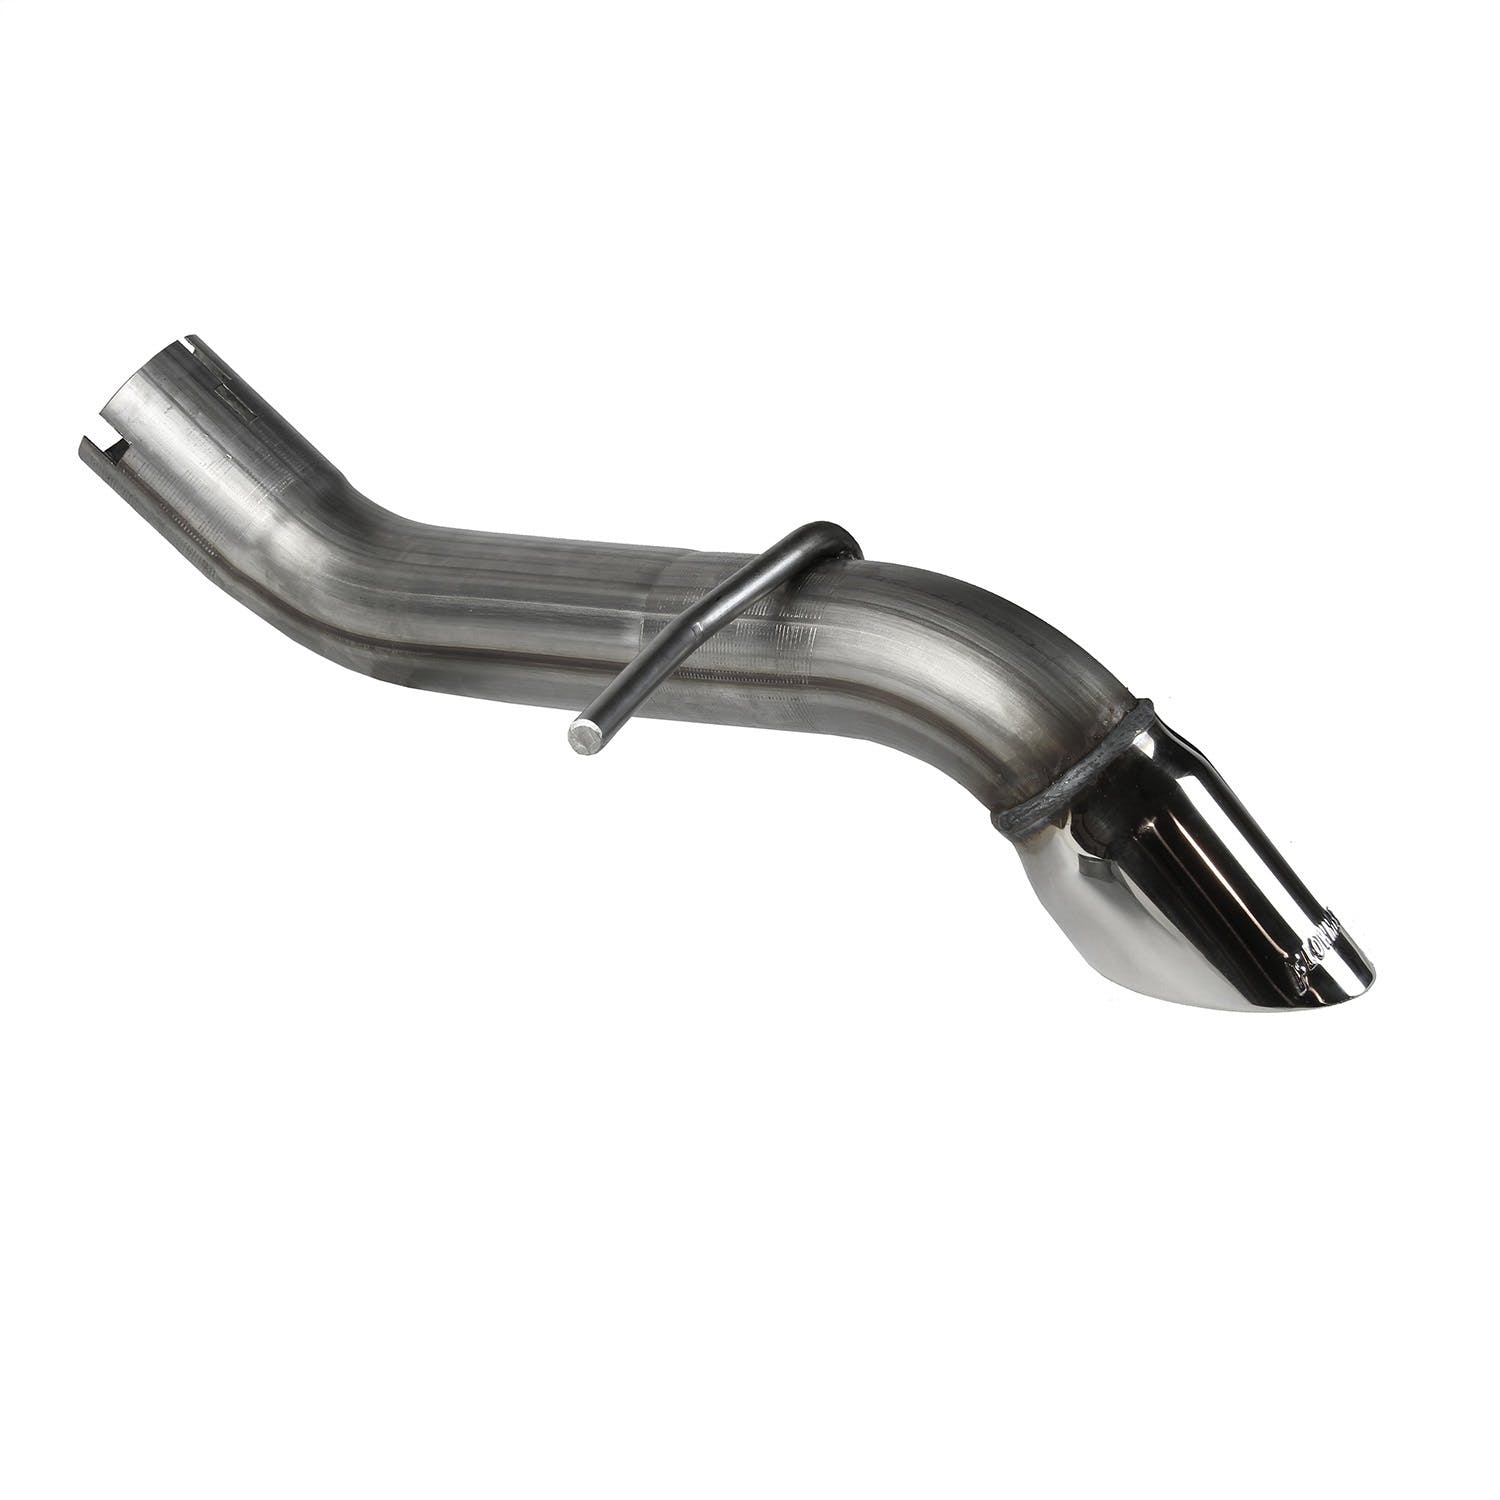 Flowmaster 817942 American Thunder Axle Back Exhaust System